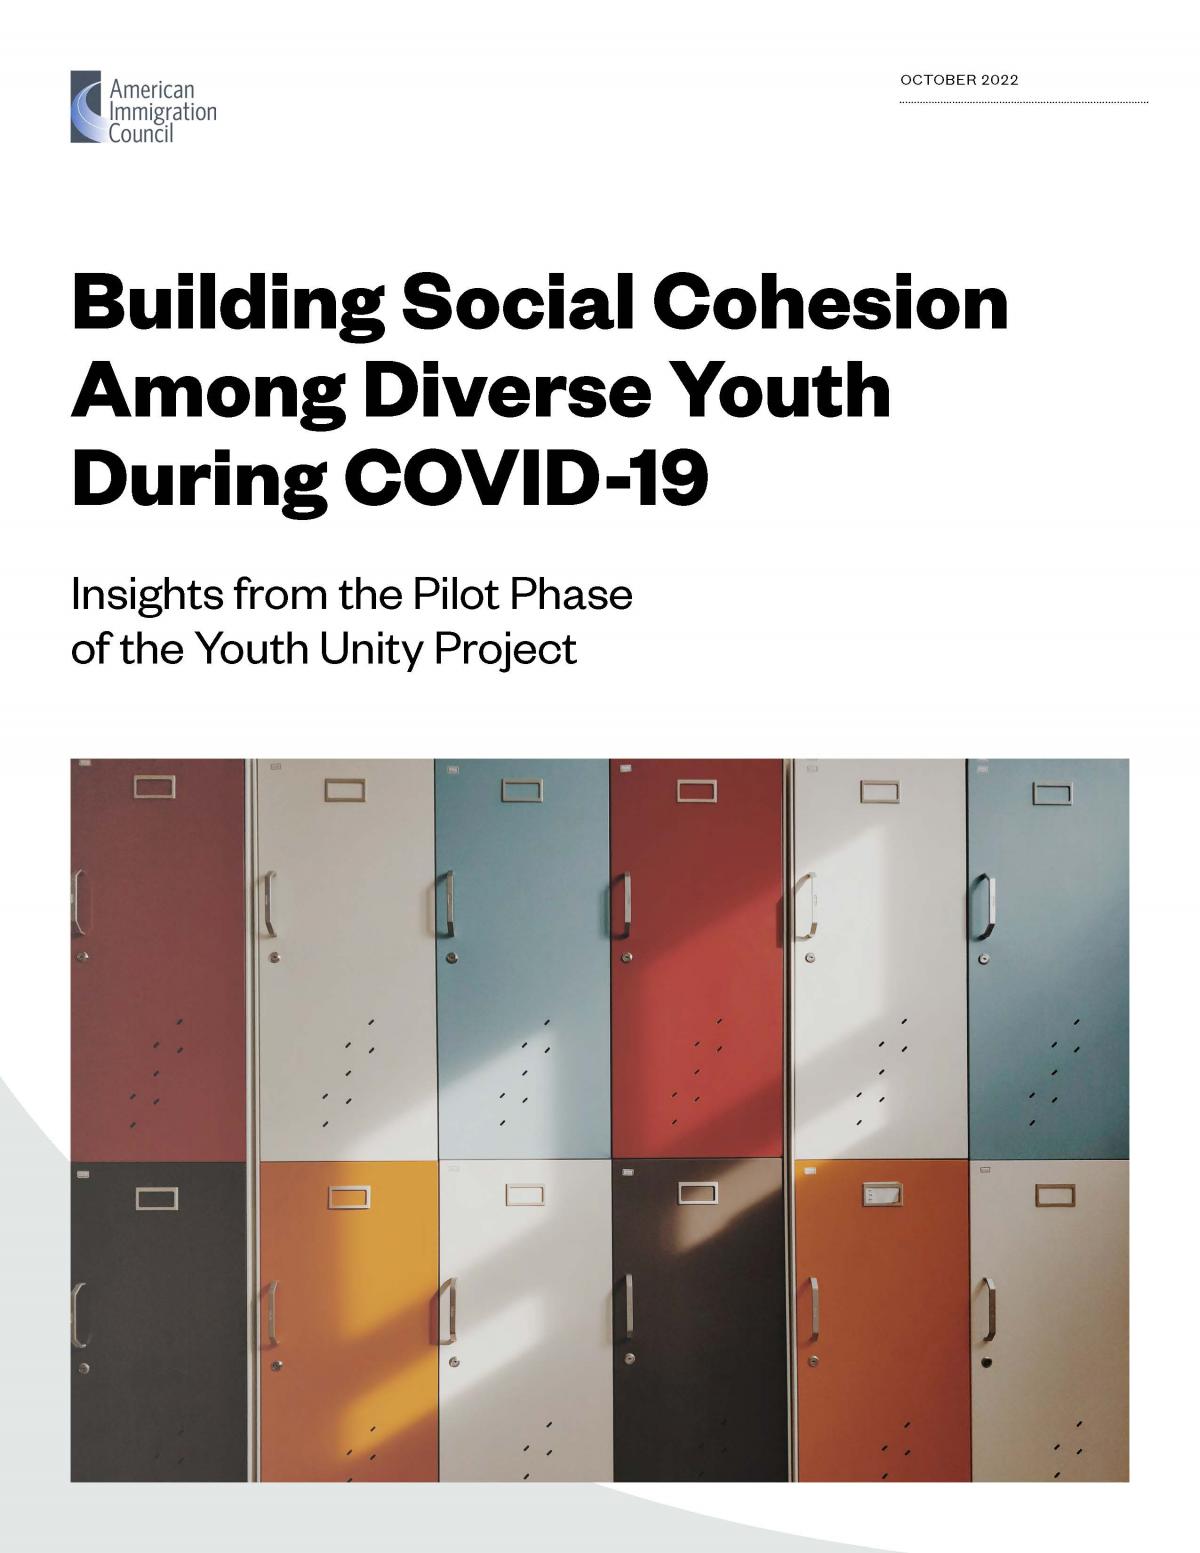 Cover page for Building Social Cohesion Among Diverse Youth During COVID-19 report